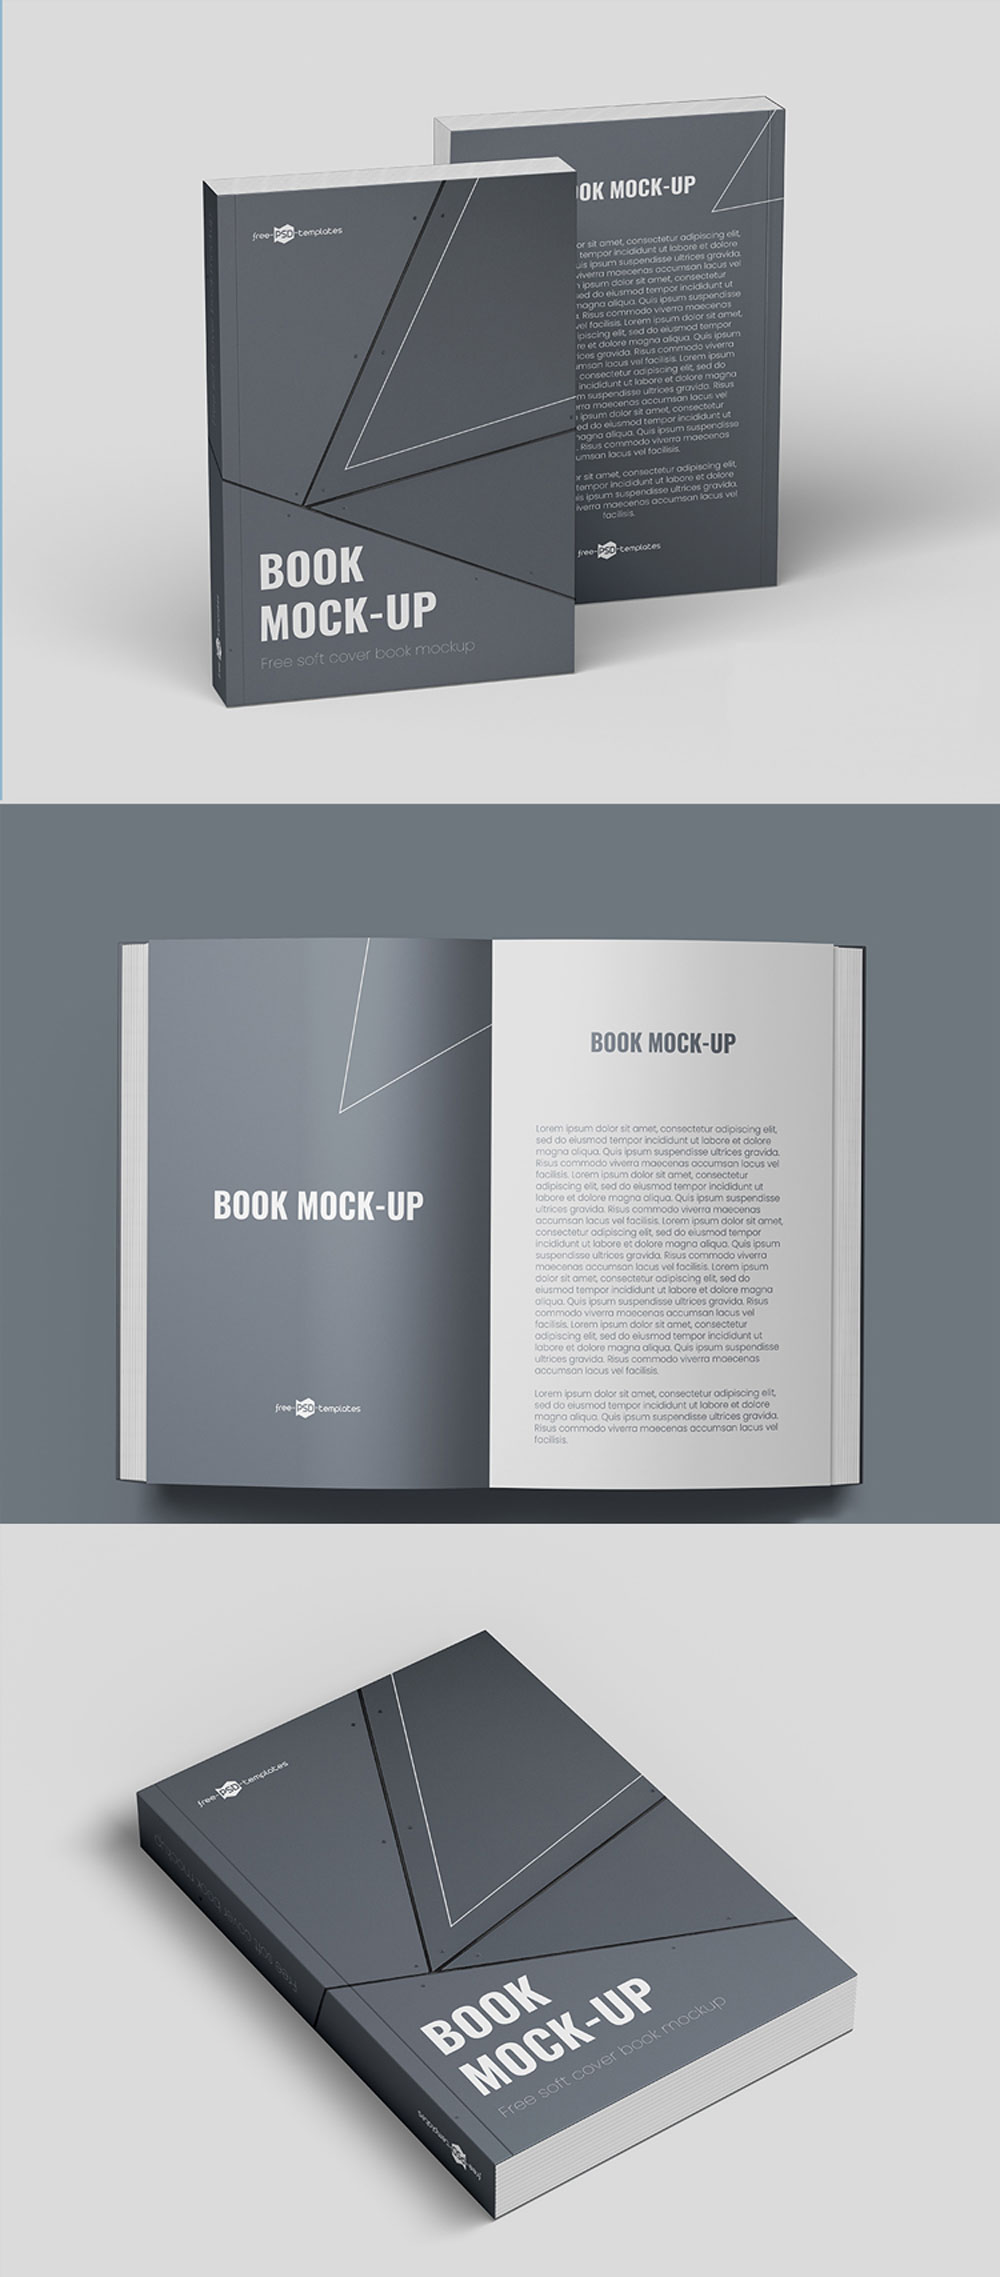 Softcover Book Mockup Free Download